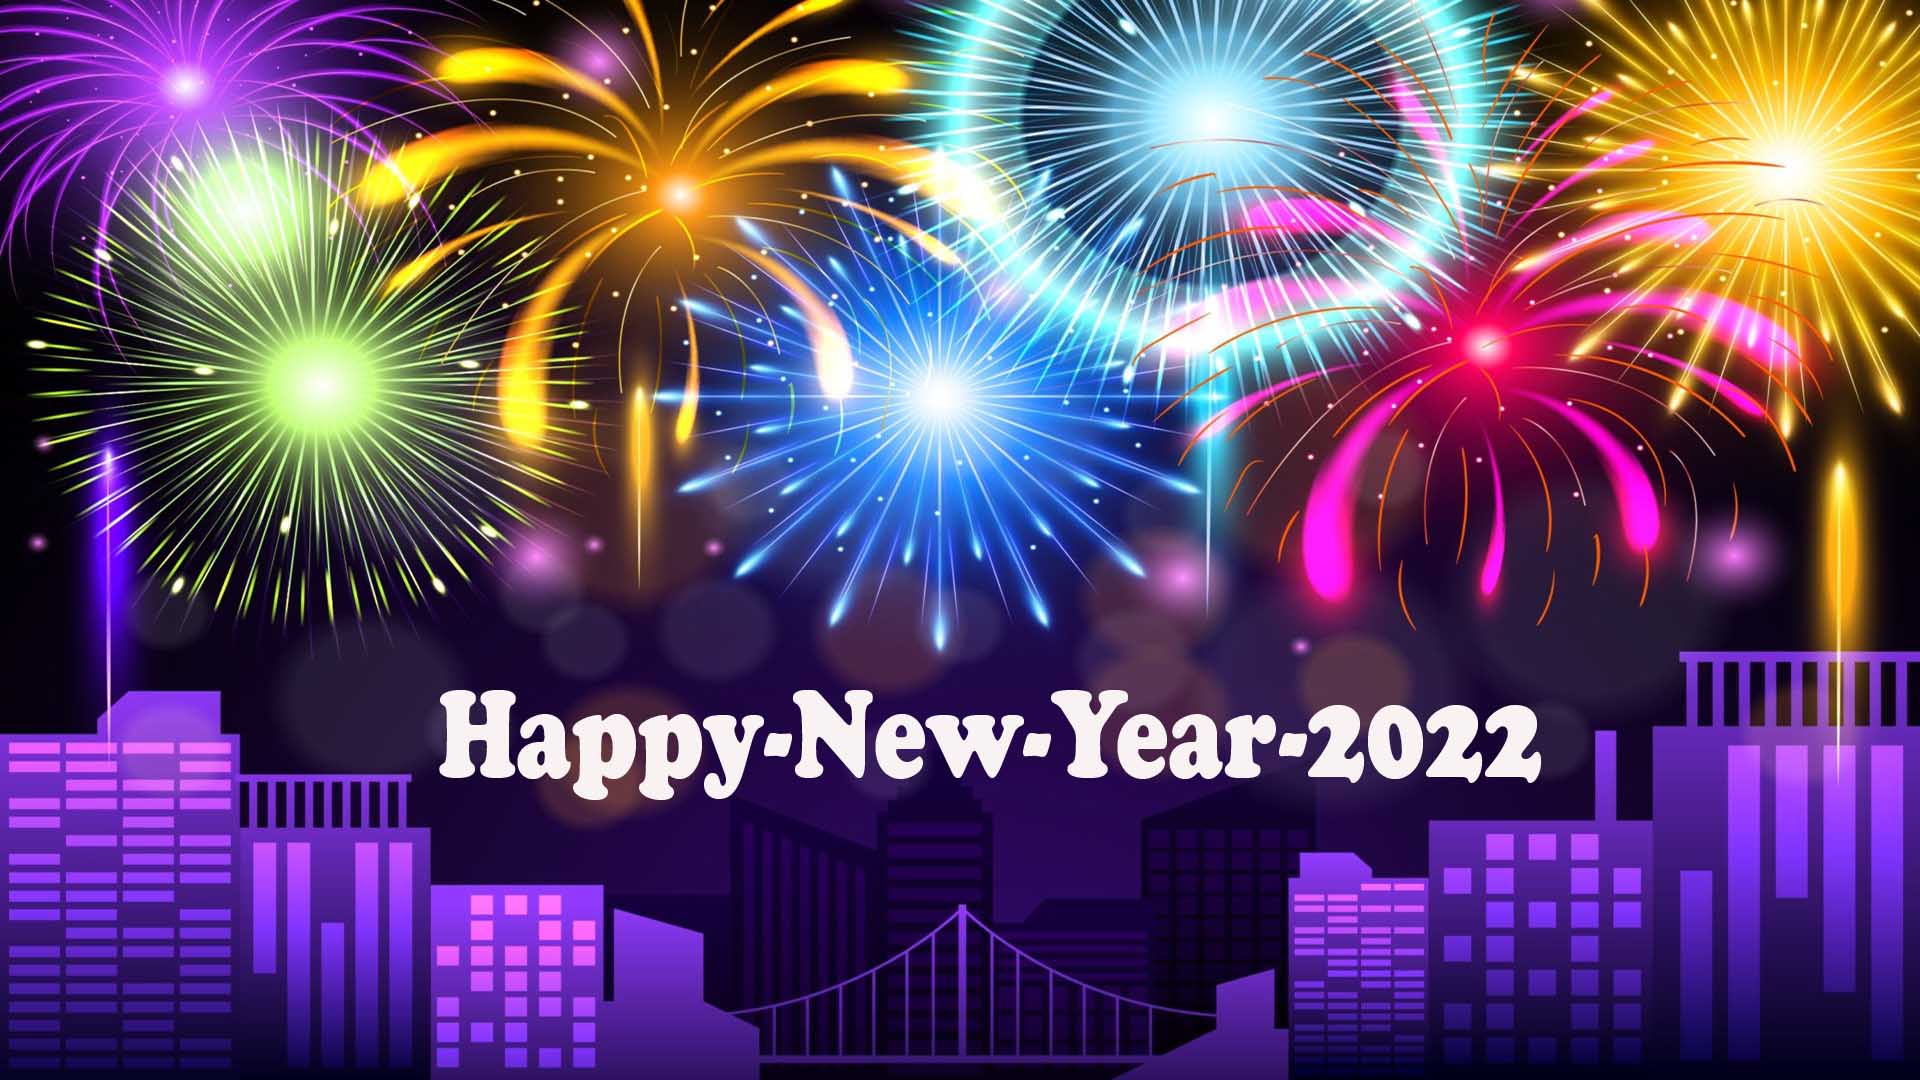 Happy New Year 2022 Greeting Card For Android Mobile Phones Hd Wallpapers %  : 